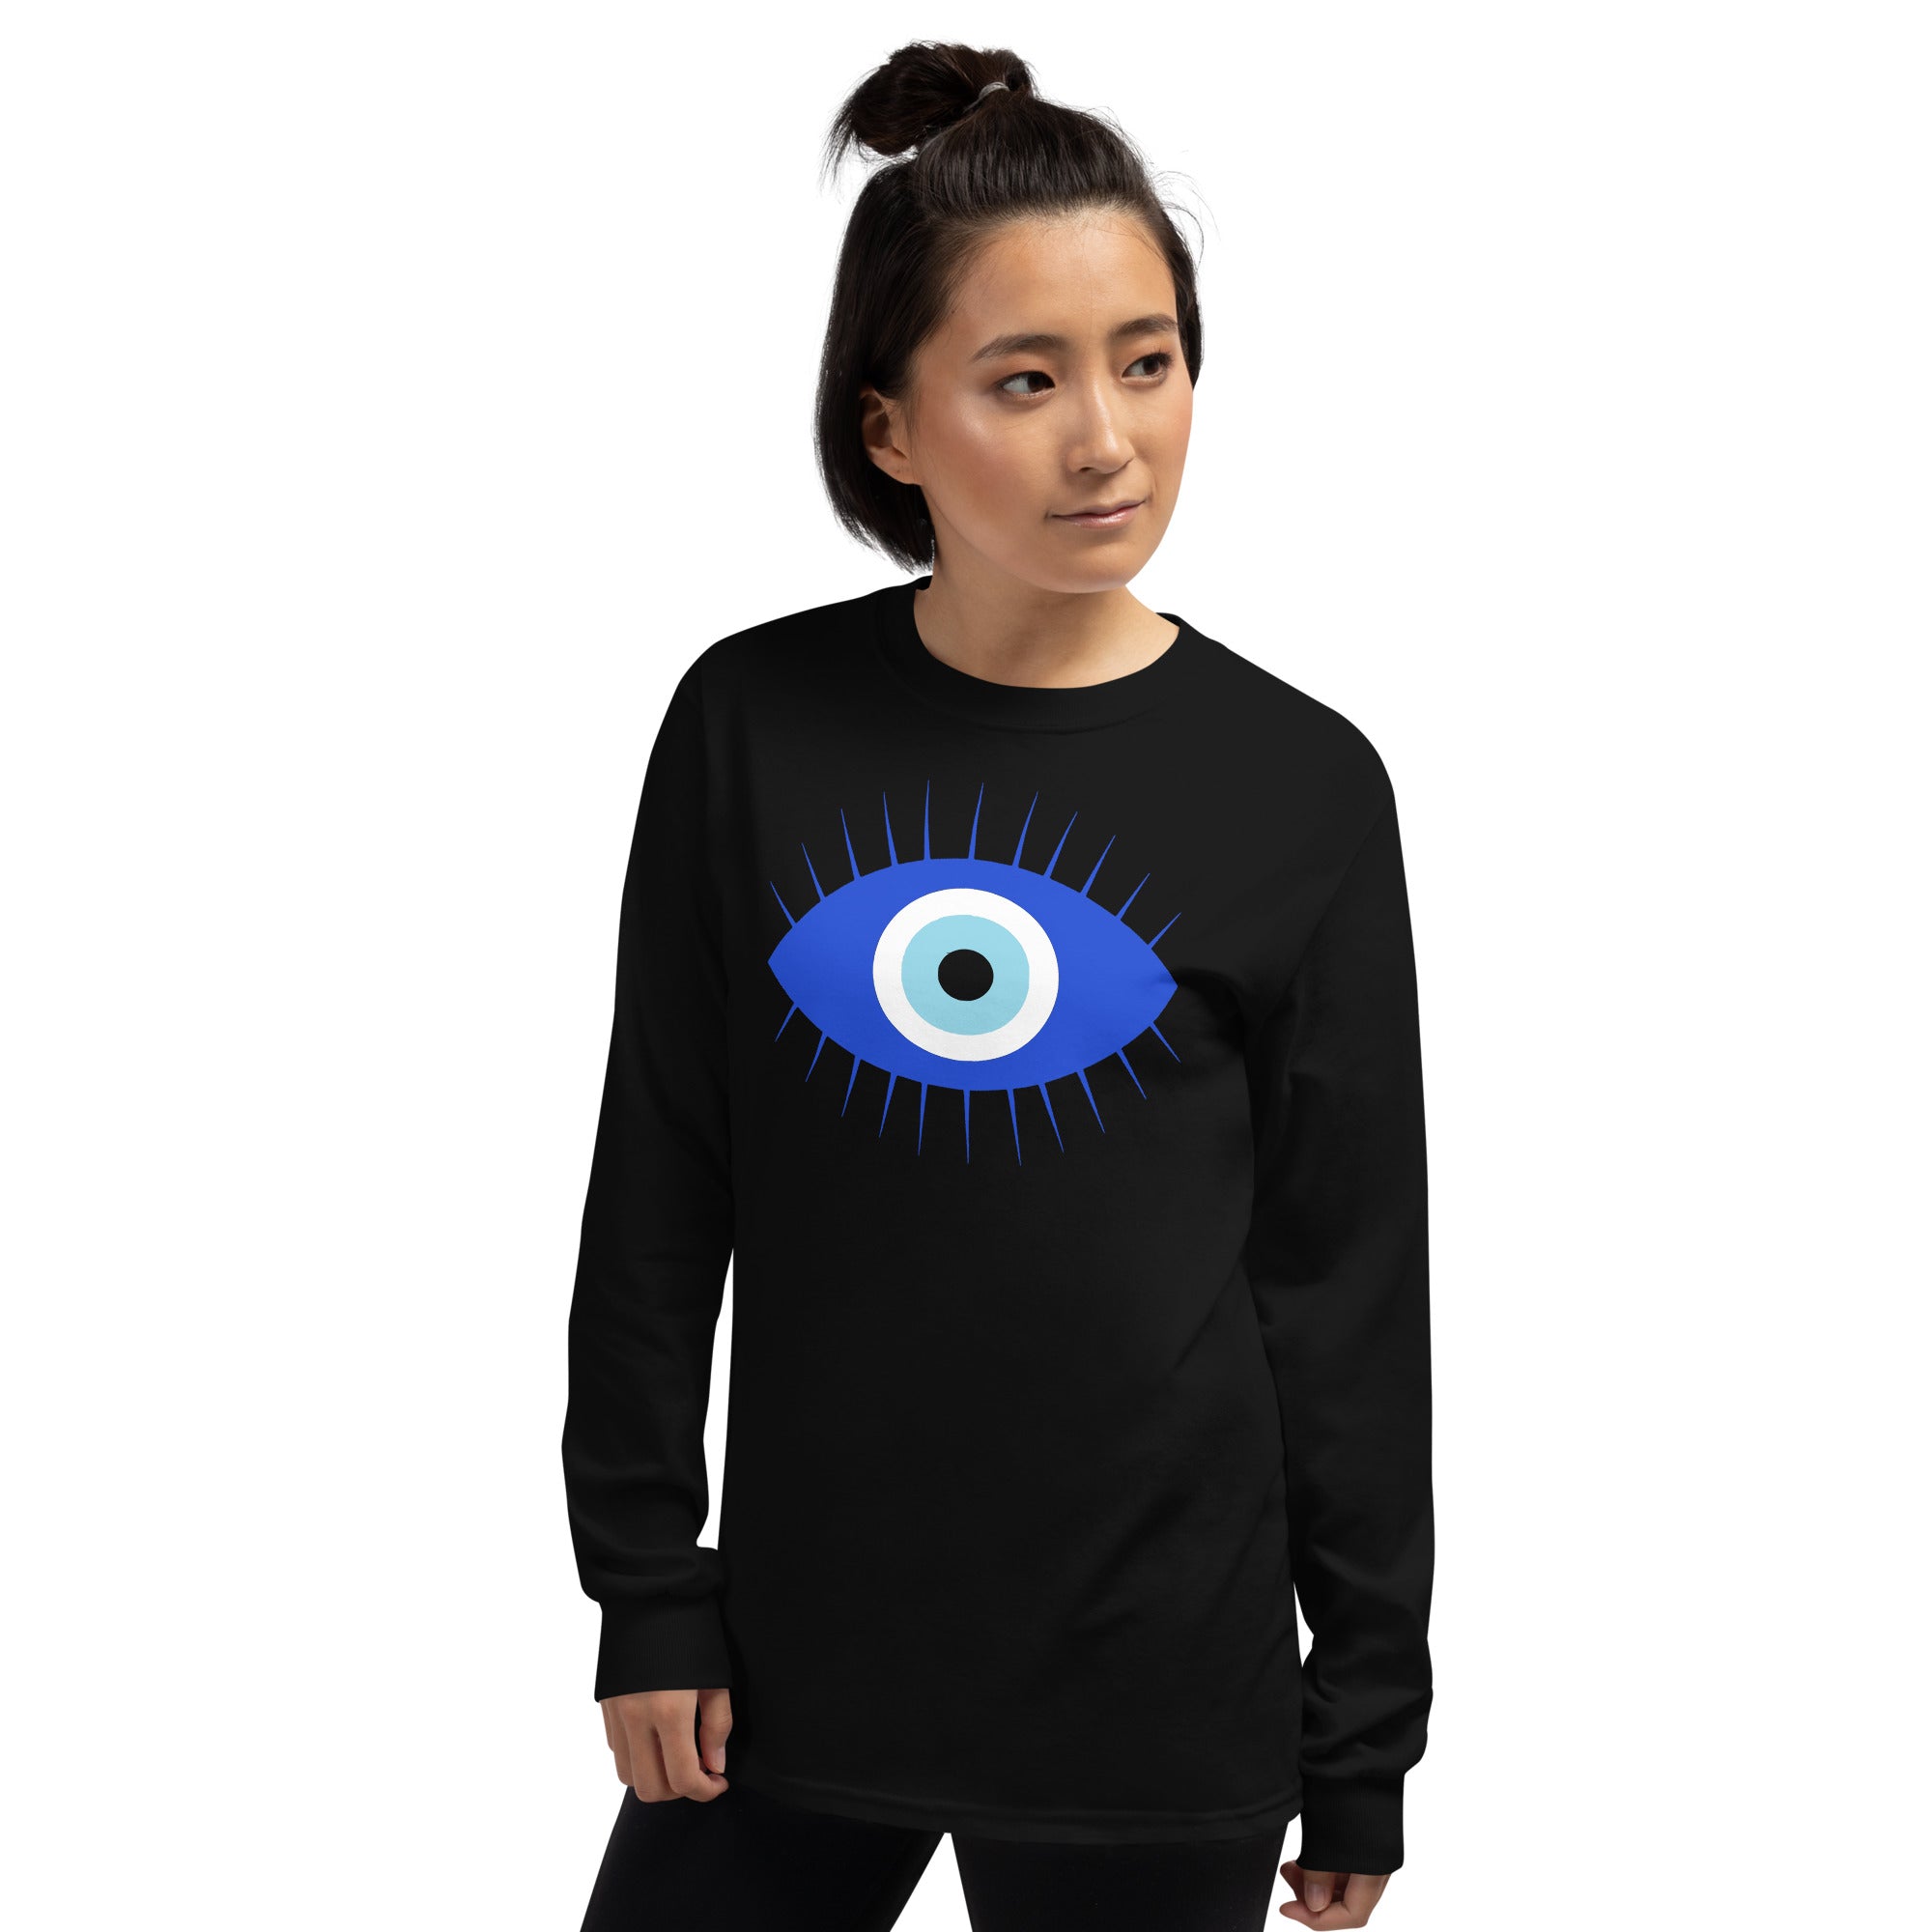 Curse of the Evil Eye Spell of Misfortune Long Sleeve Shirt